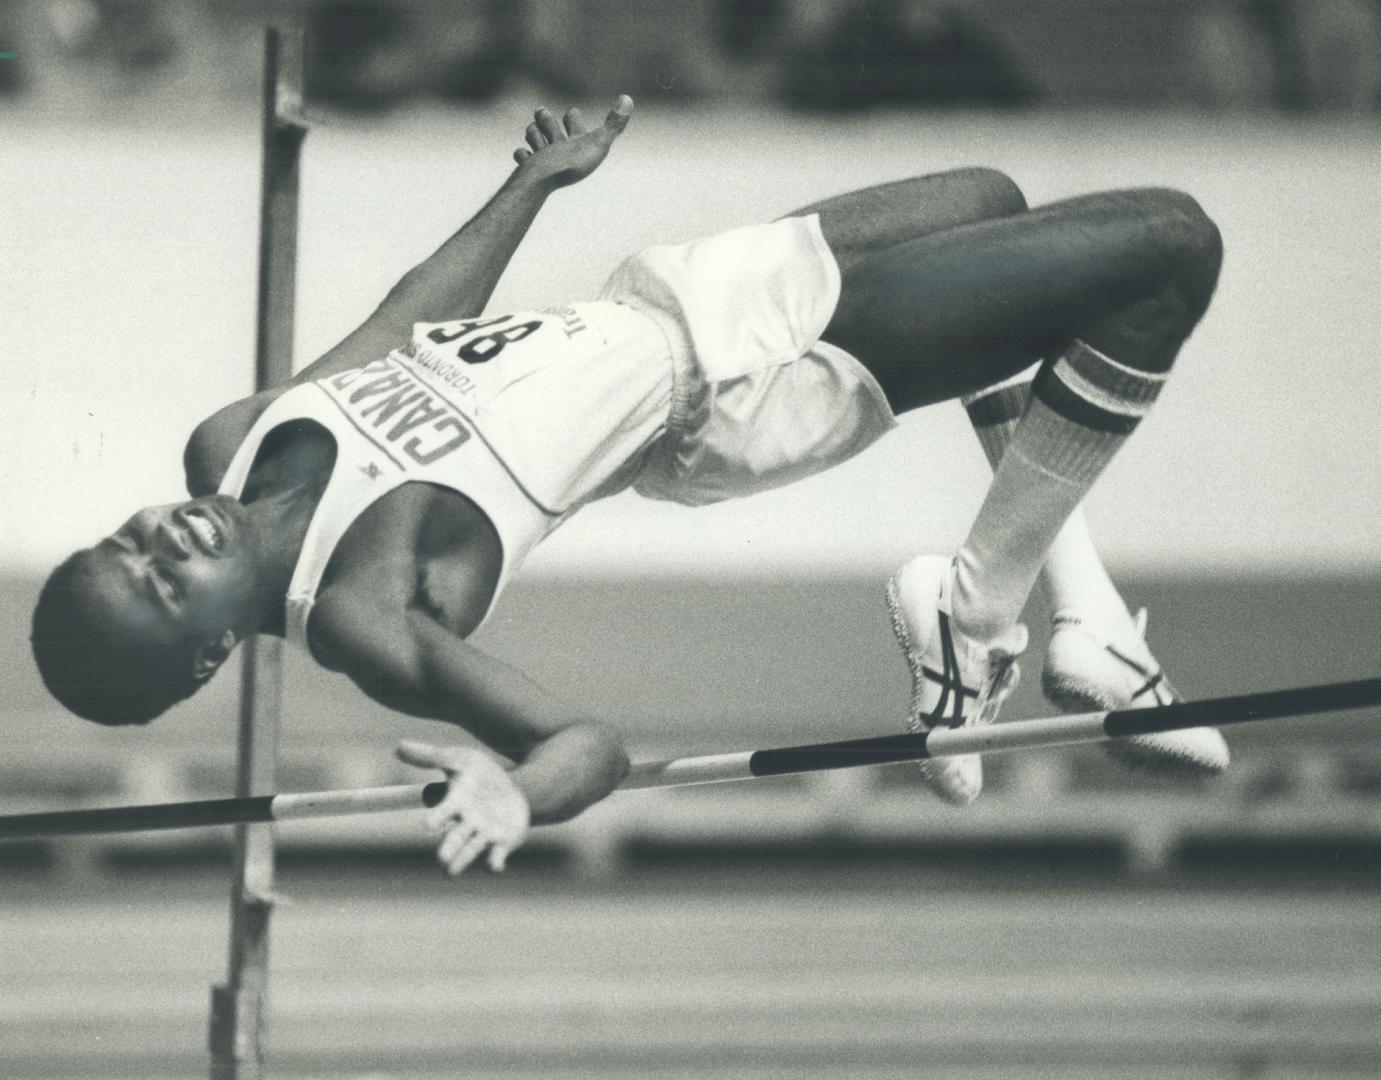 Toronto's Milt Ottey (bottom) had to settle for a fourth place finish in 2